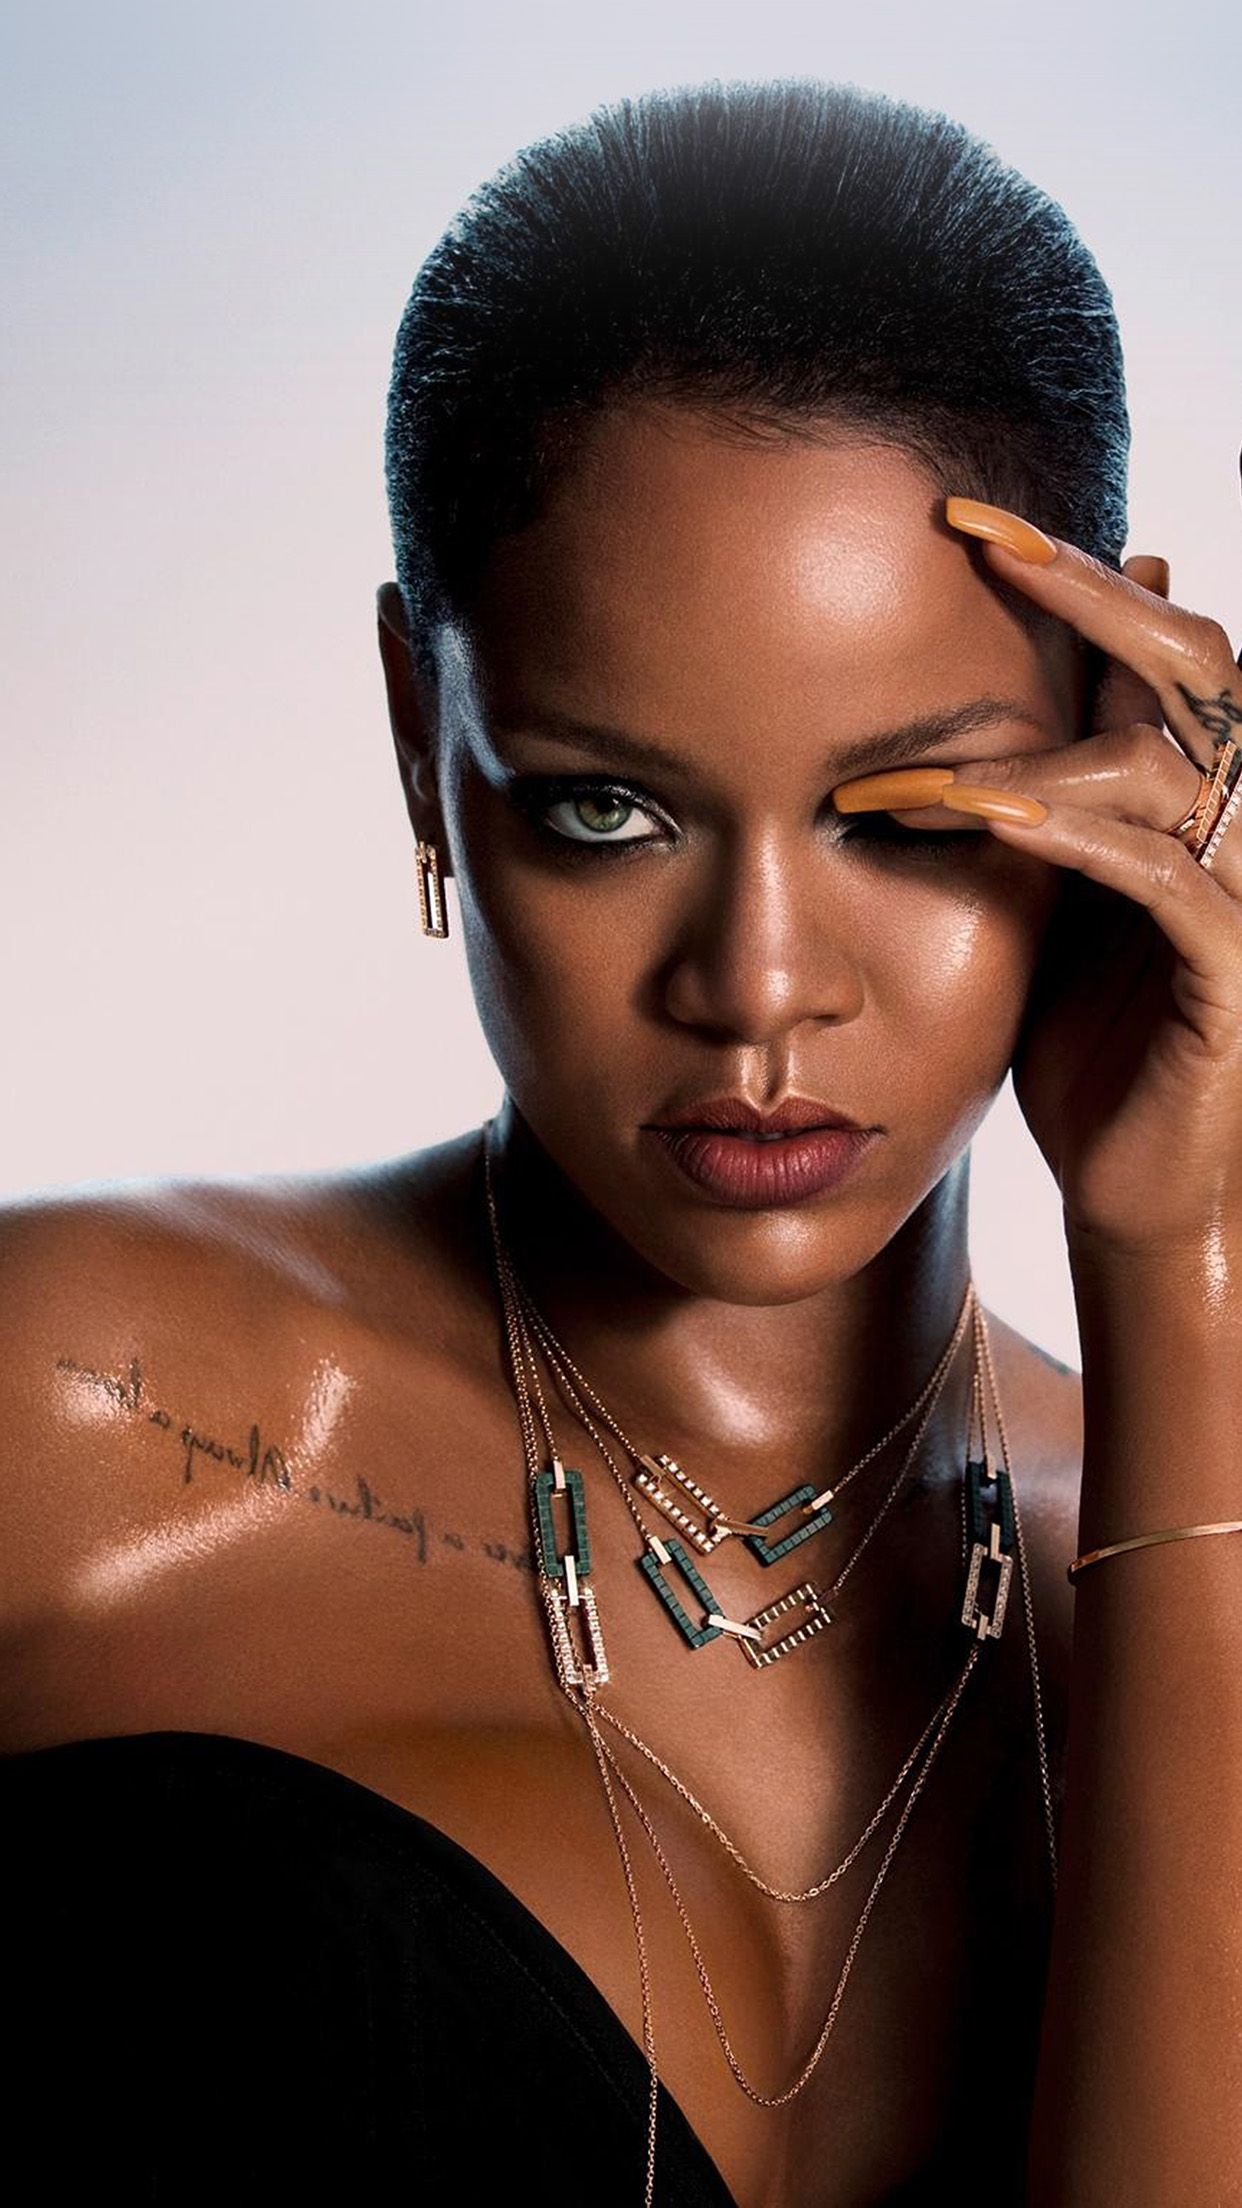 Rihanna is a Barbadian singer, songwriter, actress, and businesswoman. - Rihanna